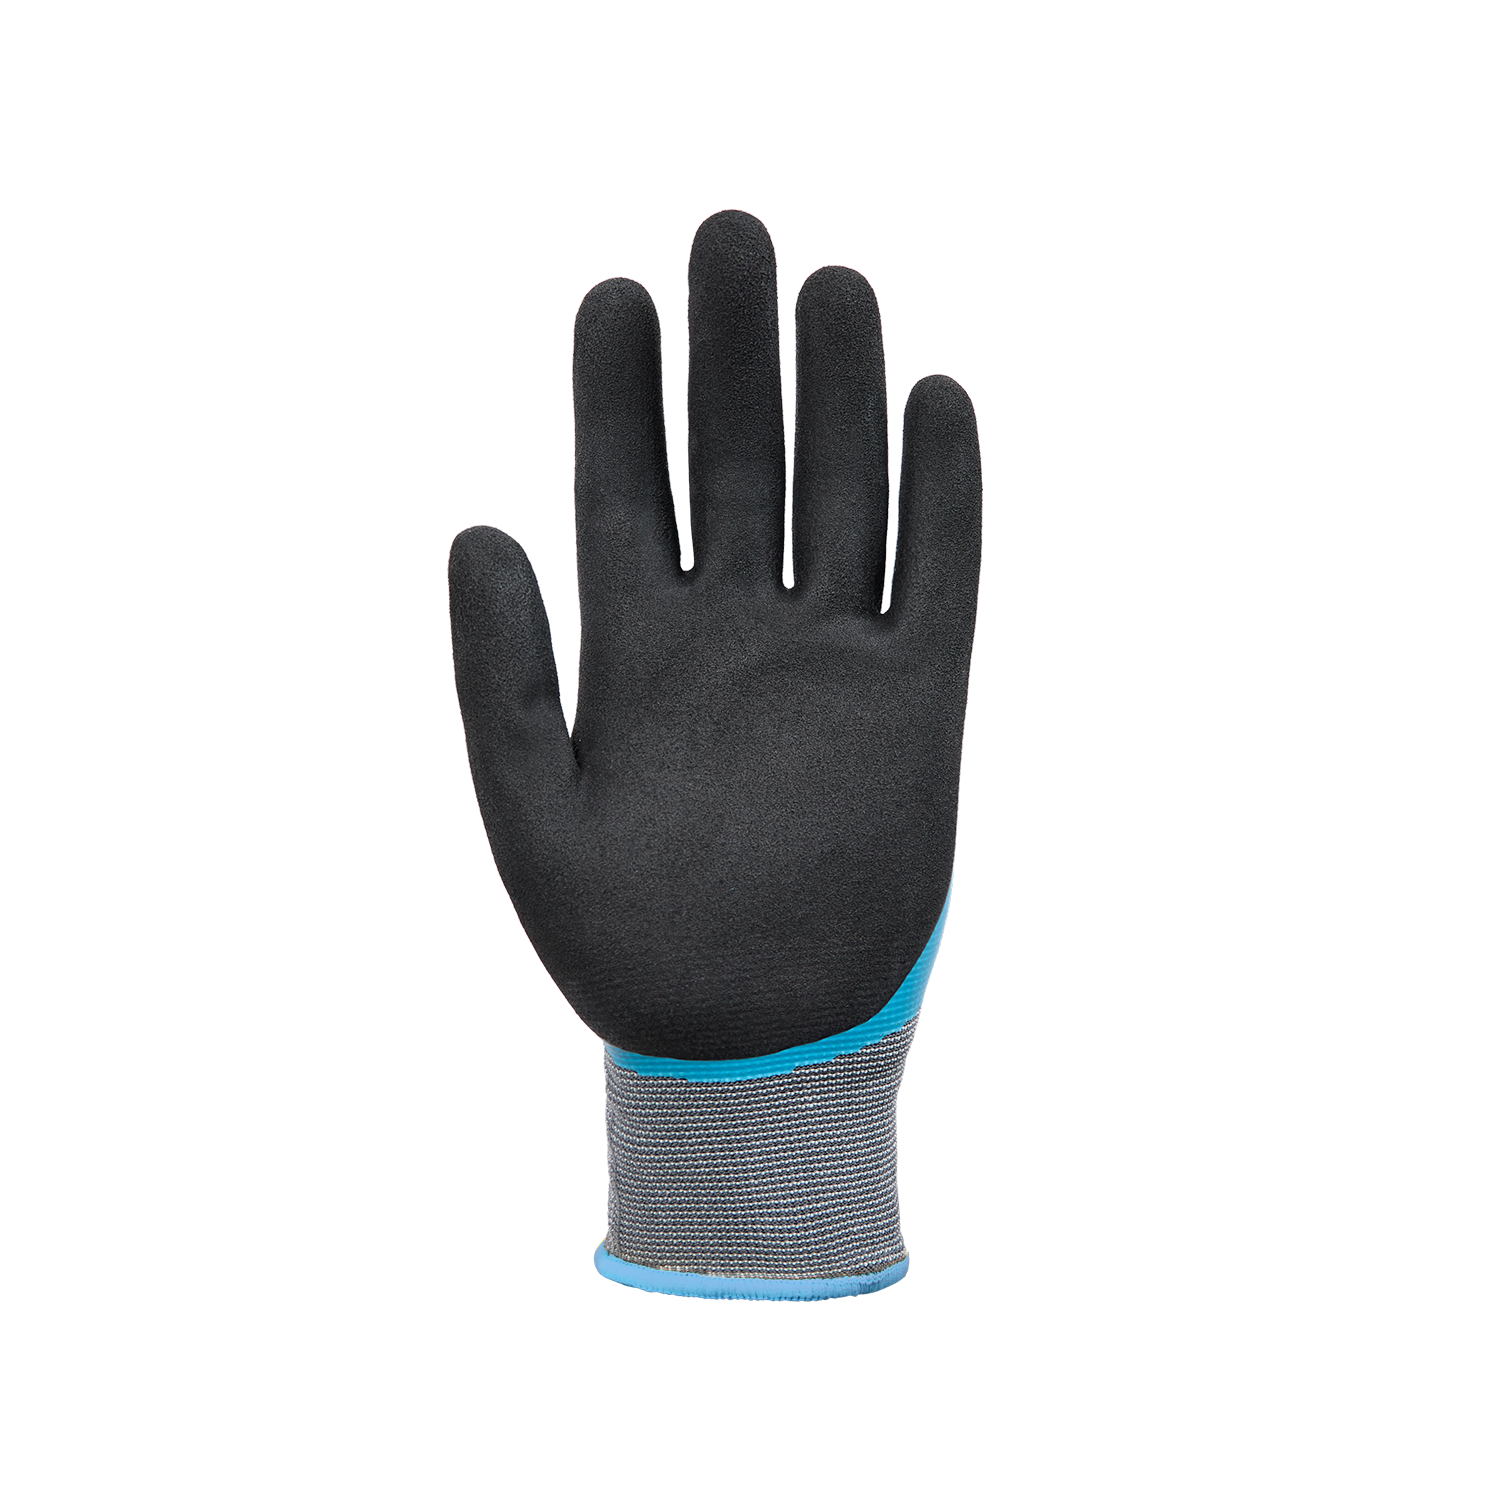 NORSE Liquid Waterproof assembly gloves size 9